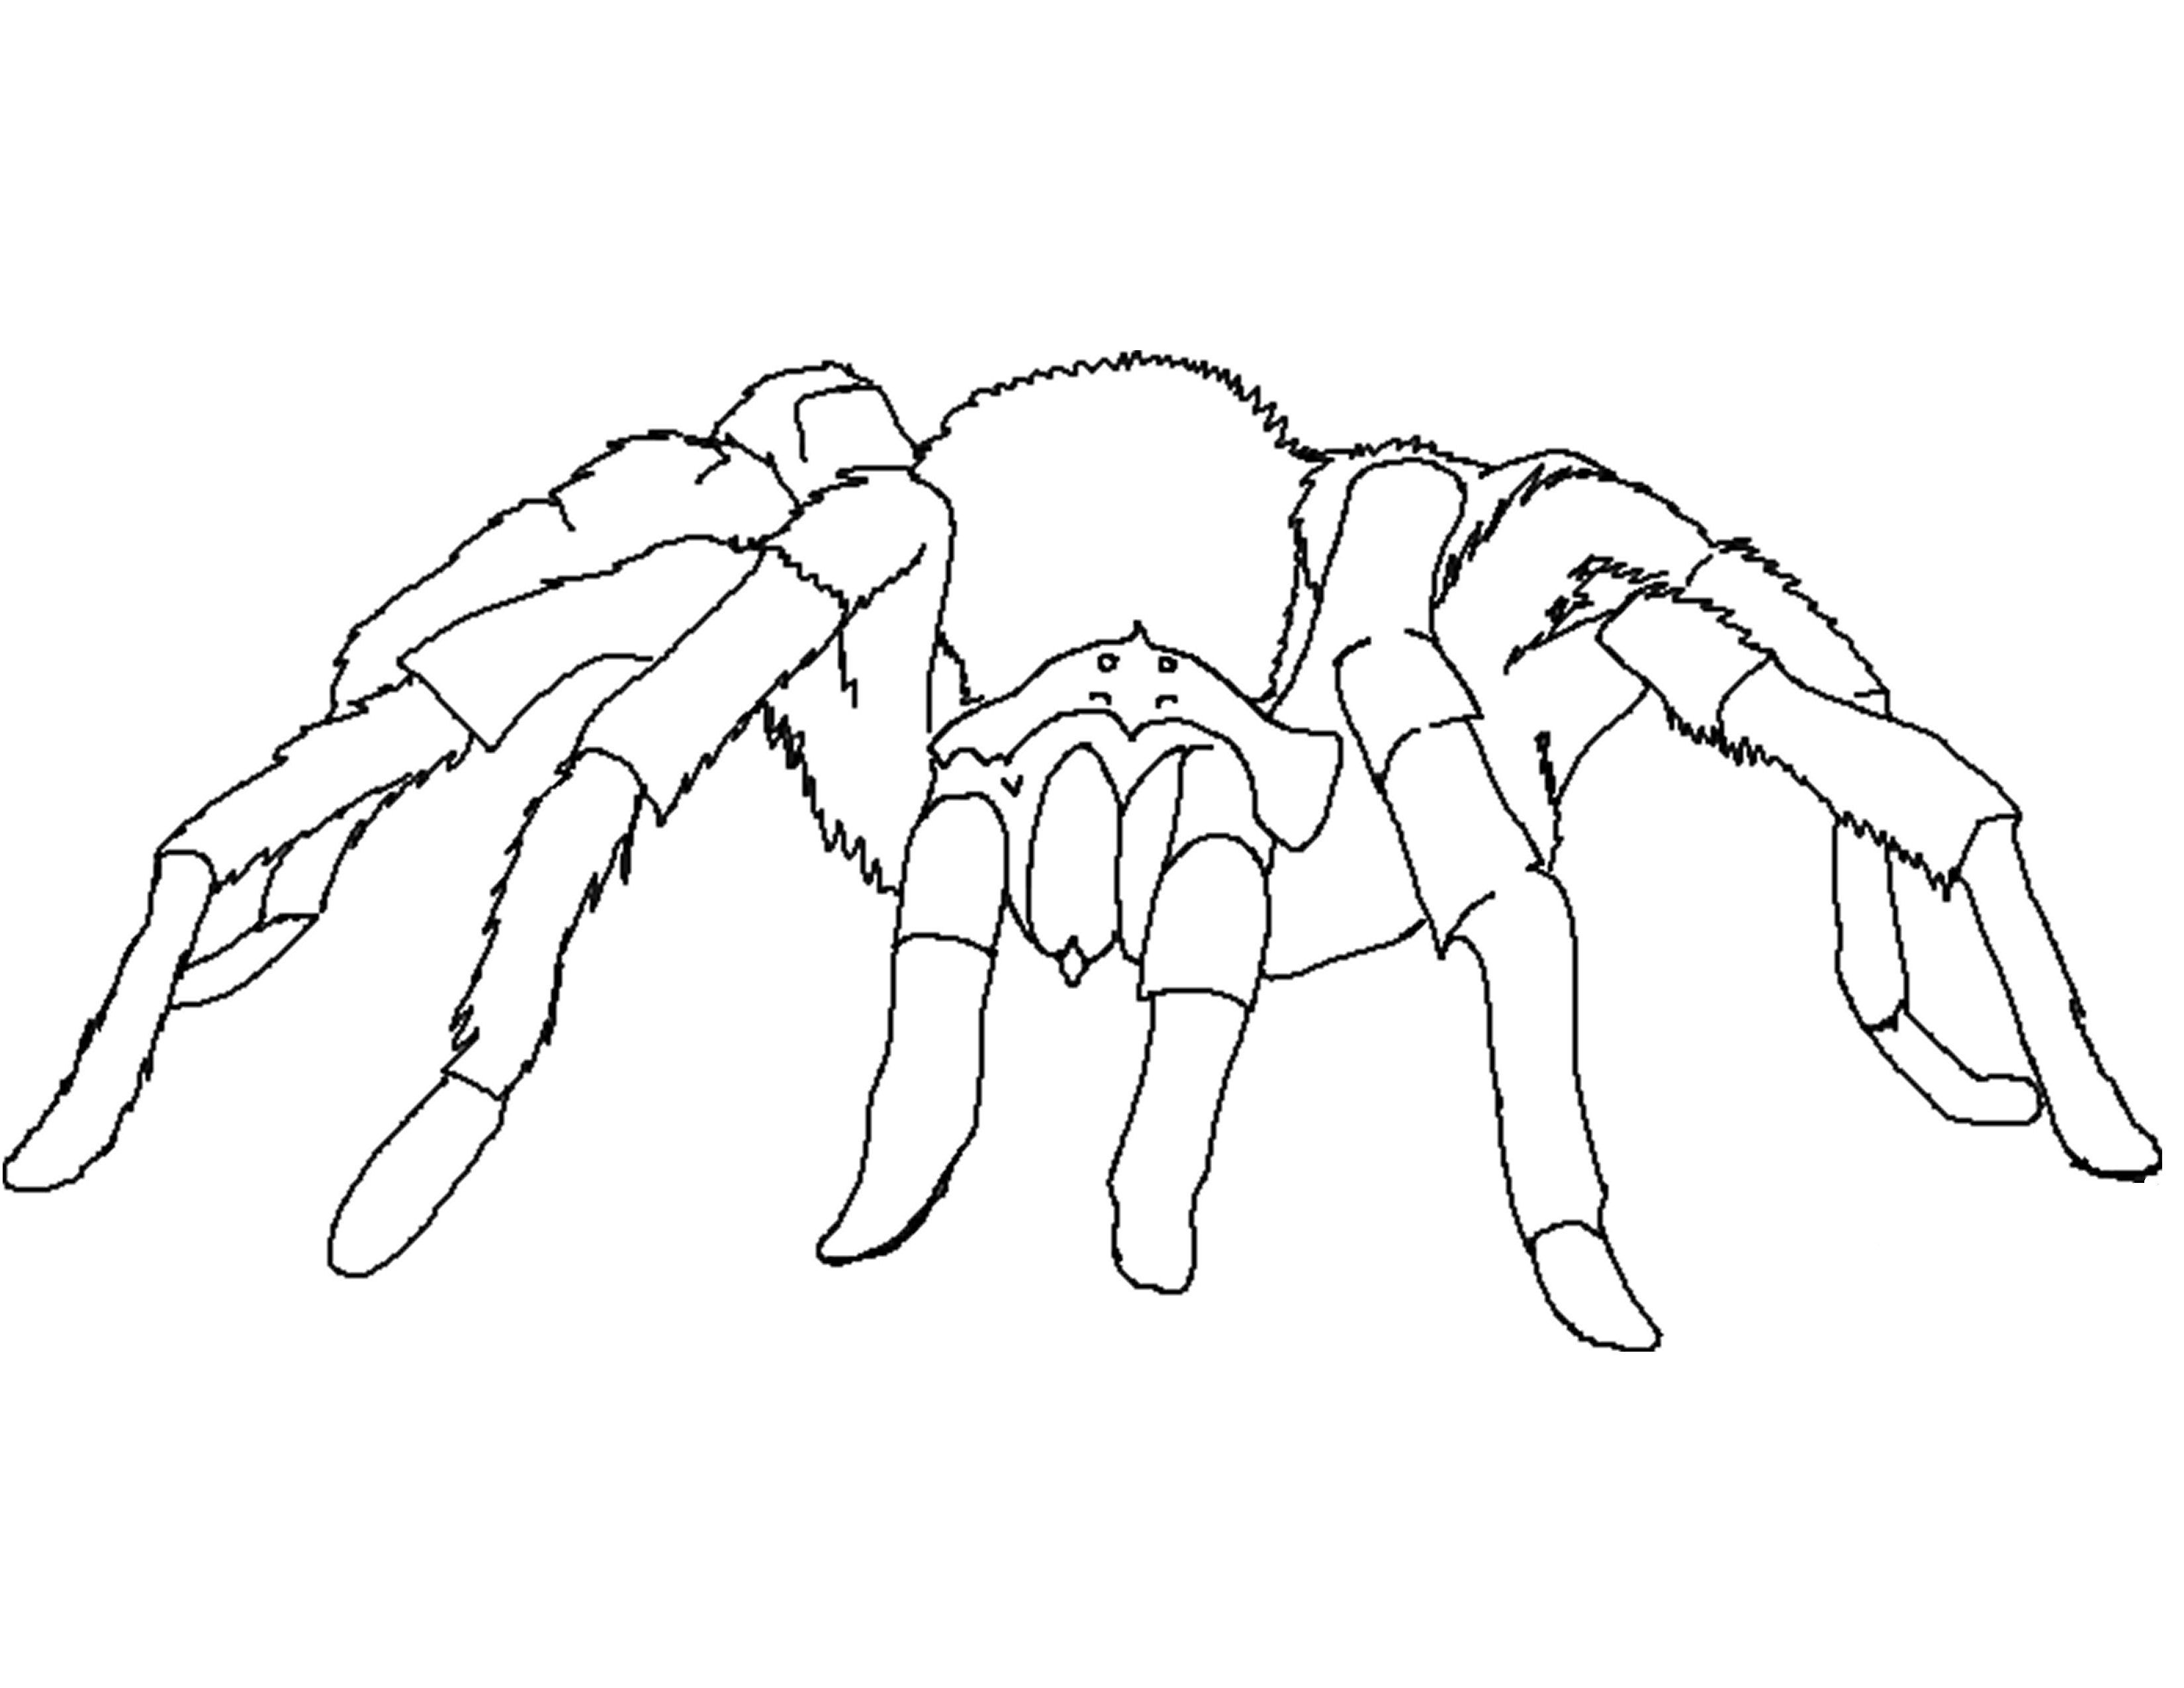 Spider Coloring Pages For Kids
 Free Printable Spider Coloring Pages For Kids